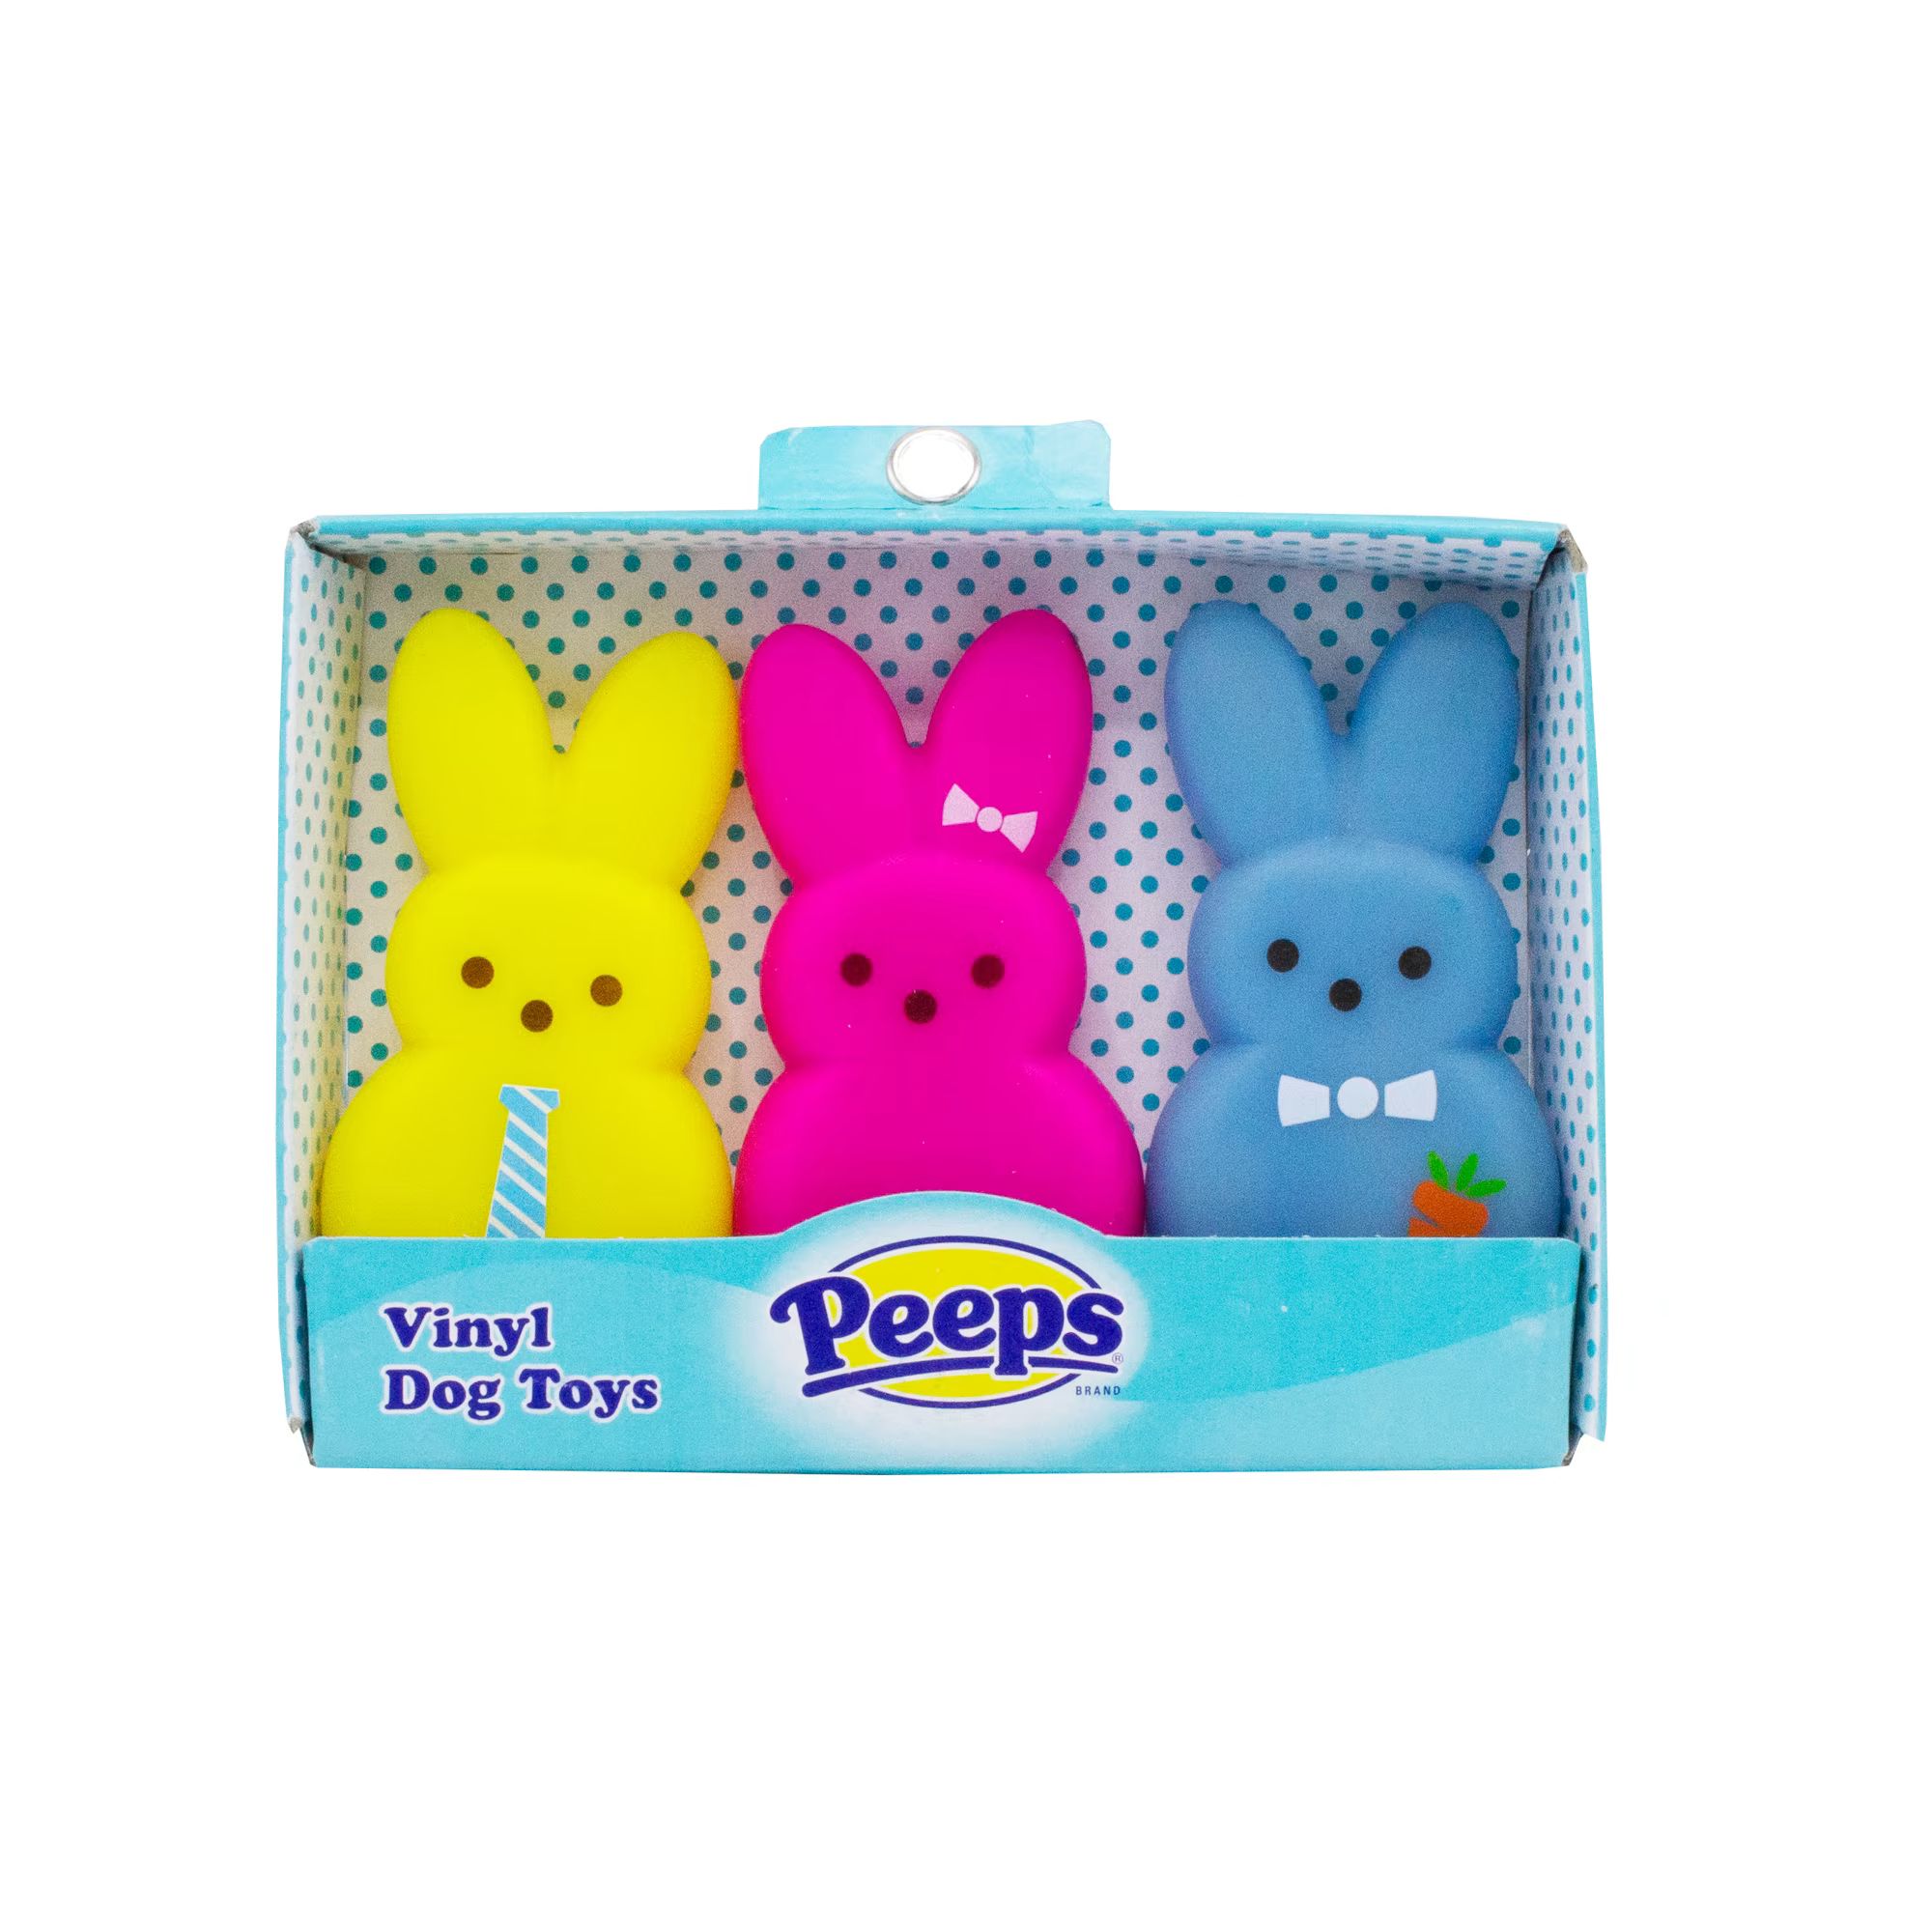 Peeps for Pets 3 Piece Dressup Bunnies Vinyl Value Pack Dog Toys, Small | Petco